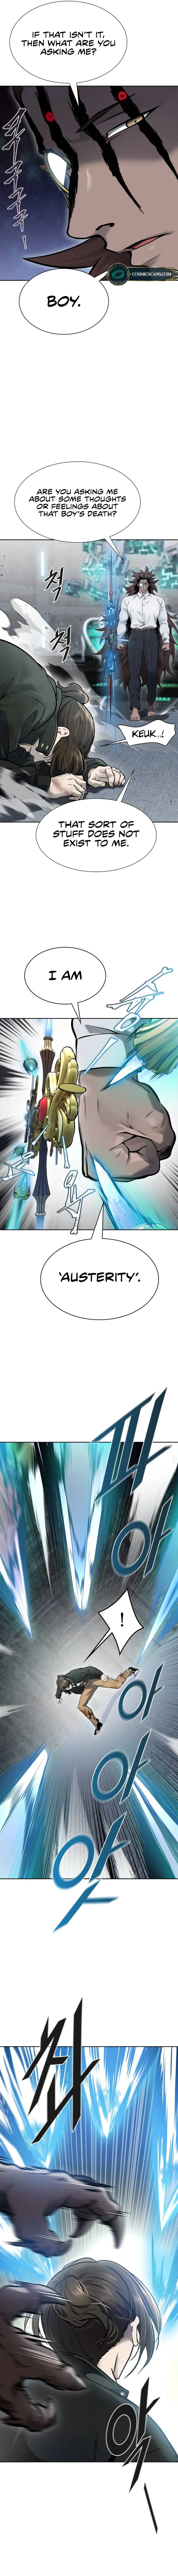 Tower of god chapter 612